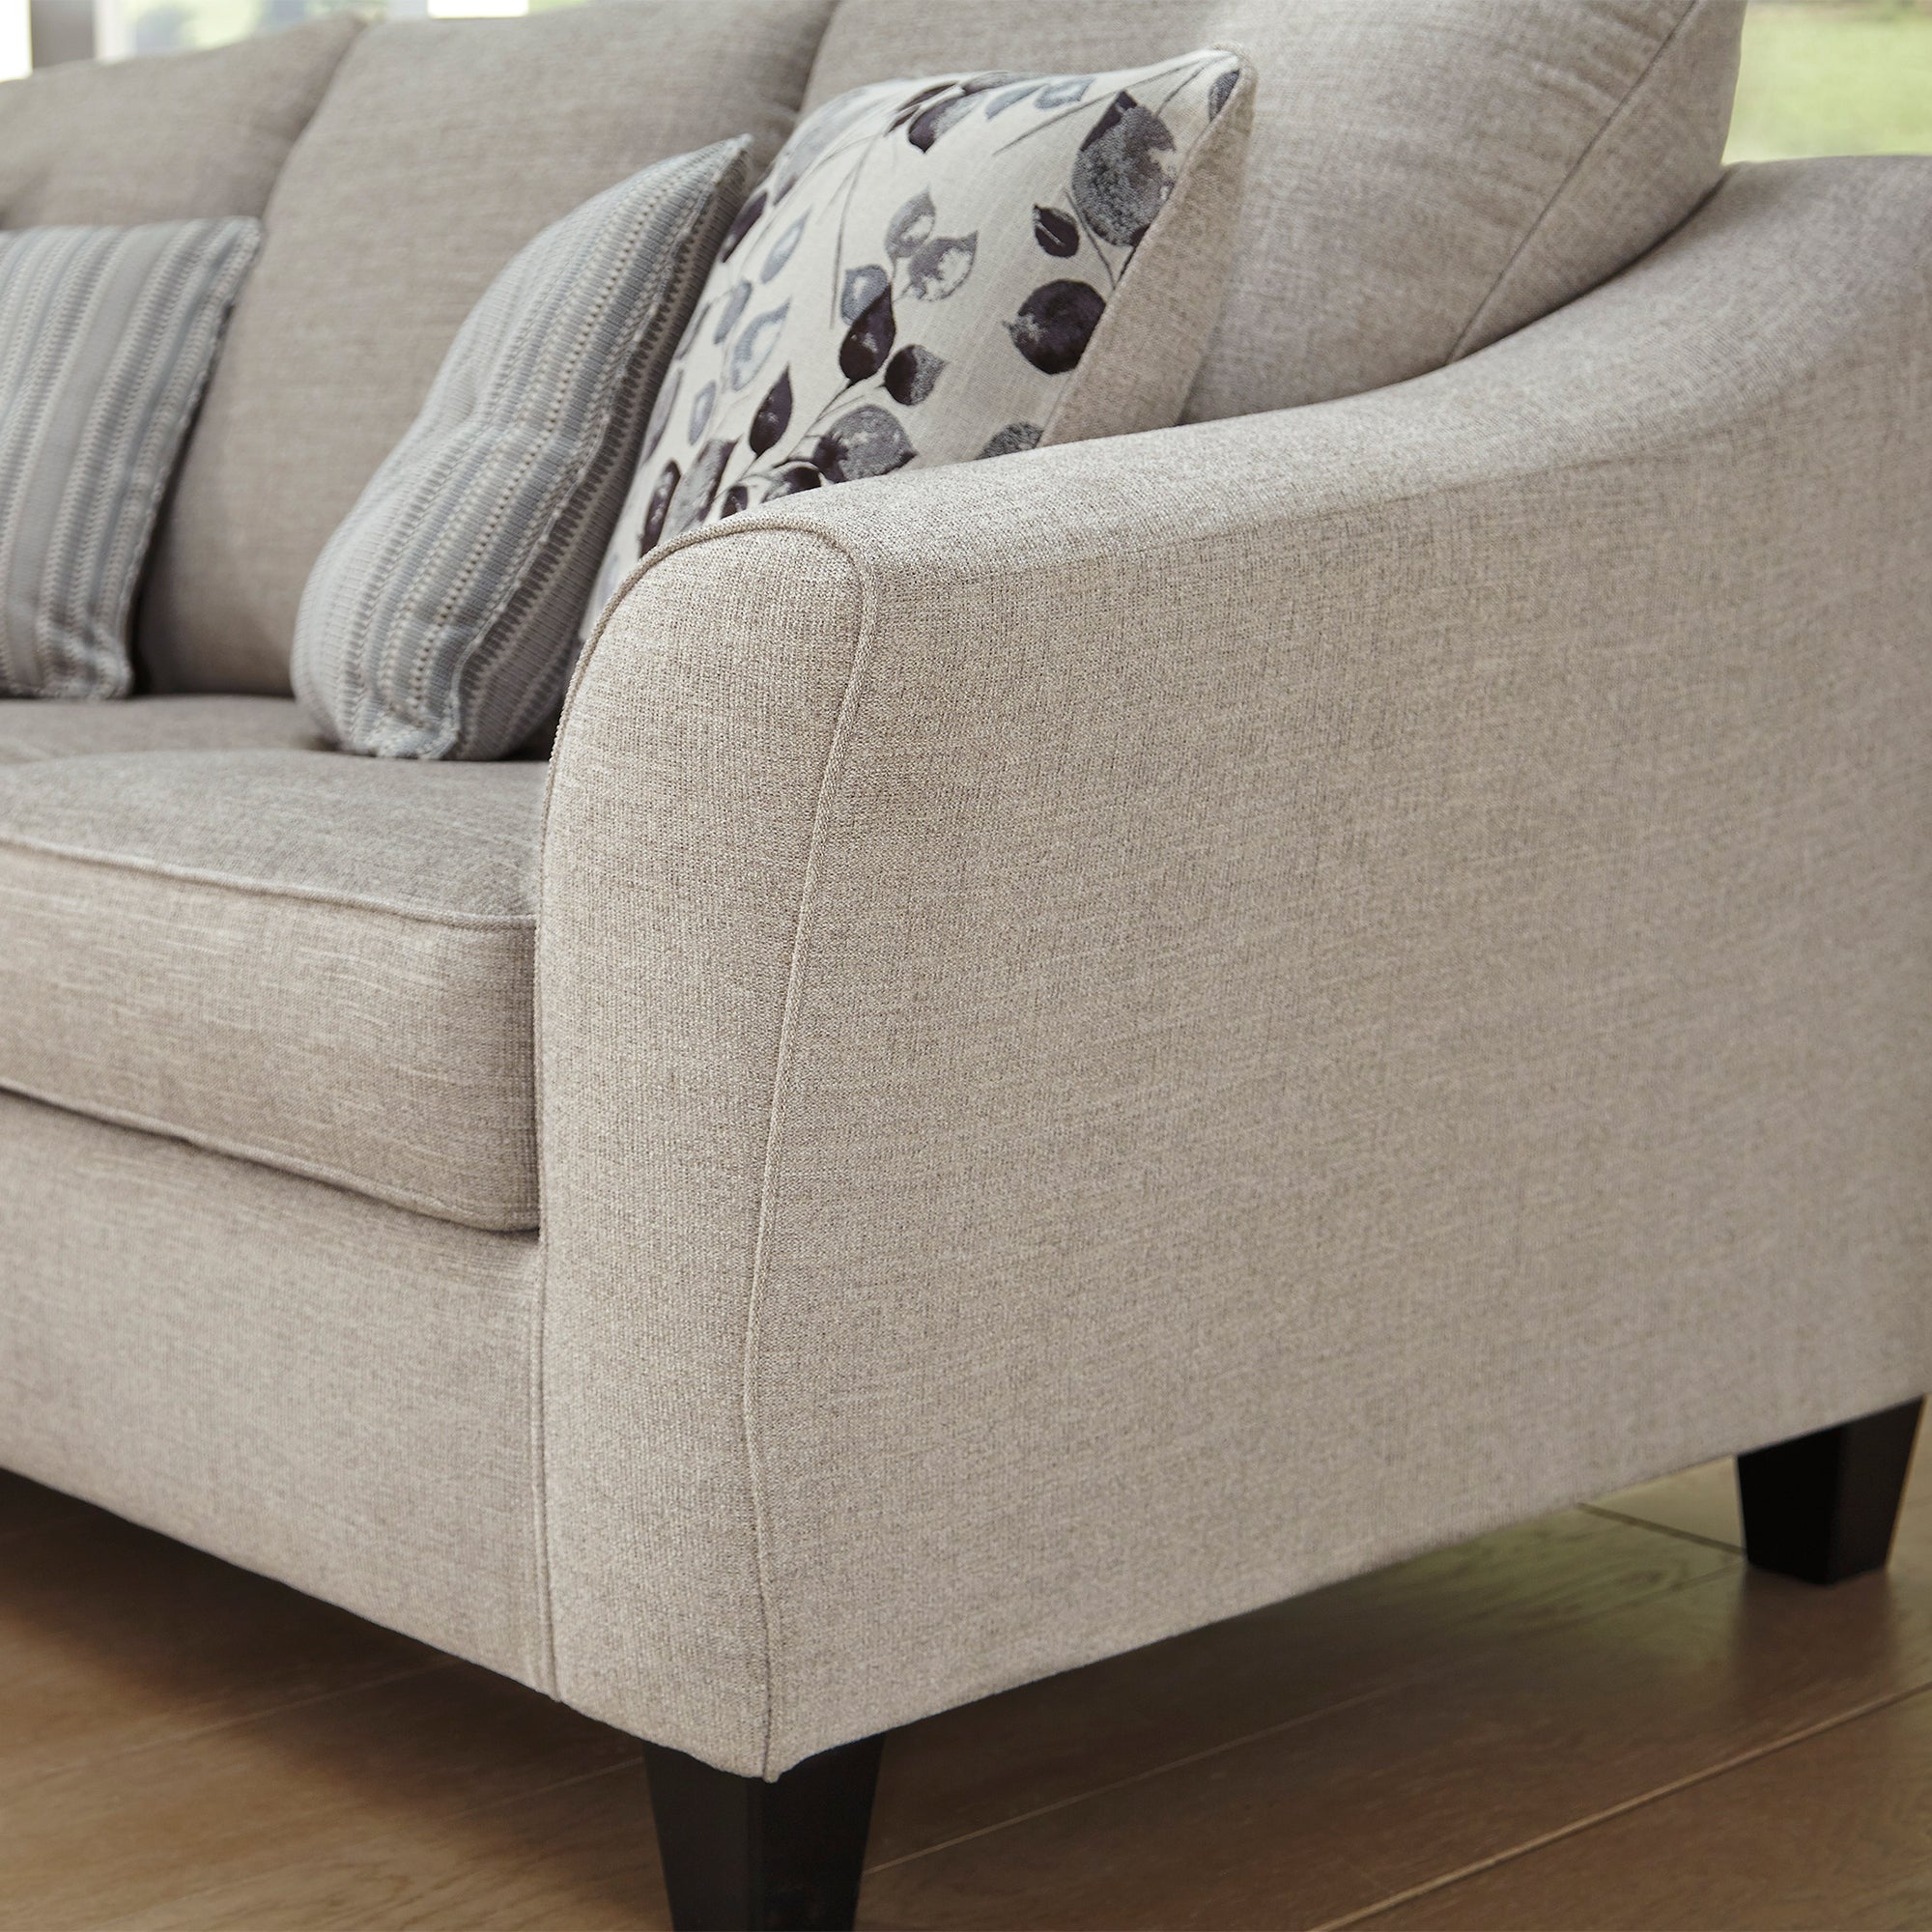 Abney Sofa Chaise and Swivel Chair